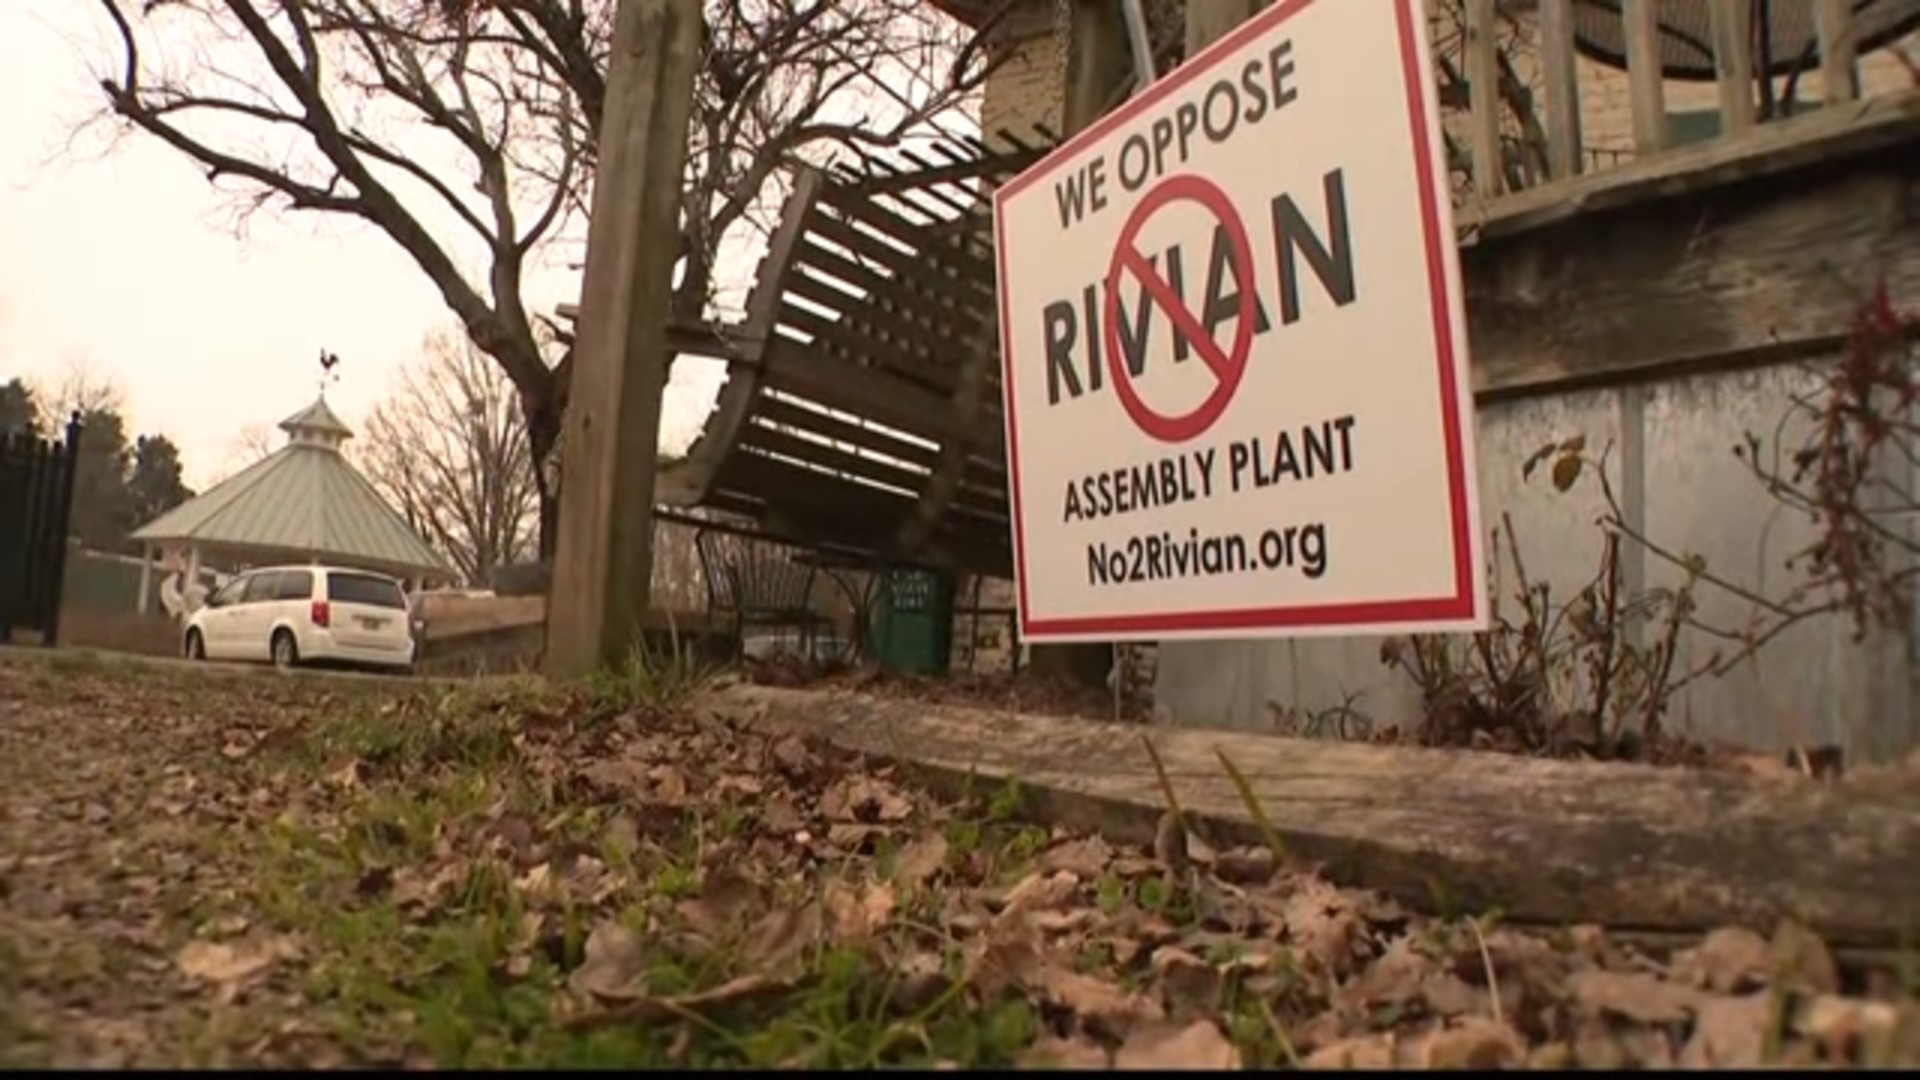 Neighbors express concern that their well water will be contaminated as the Rivian Plant begins operation.